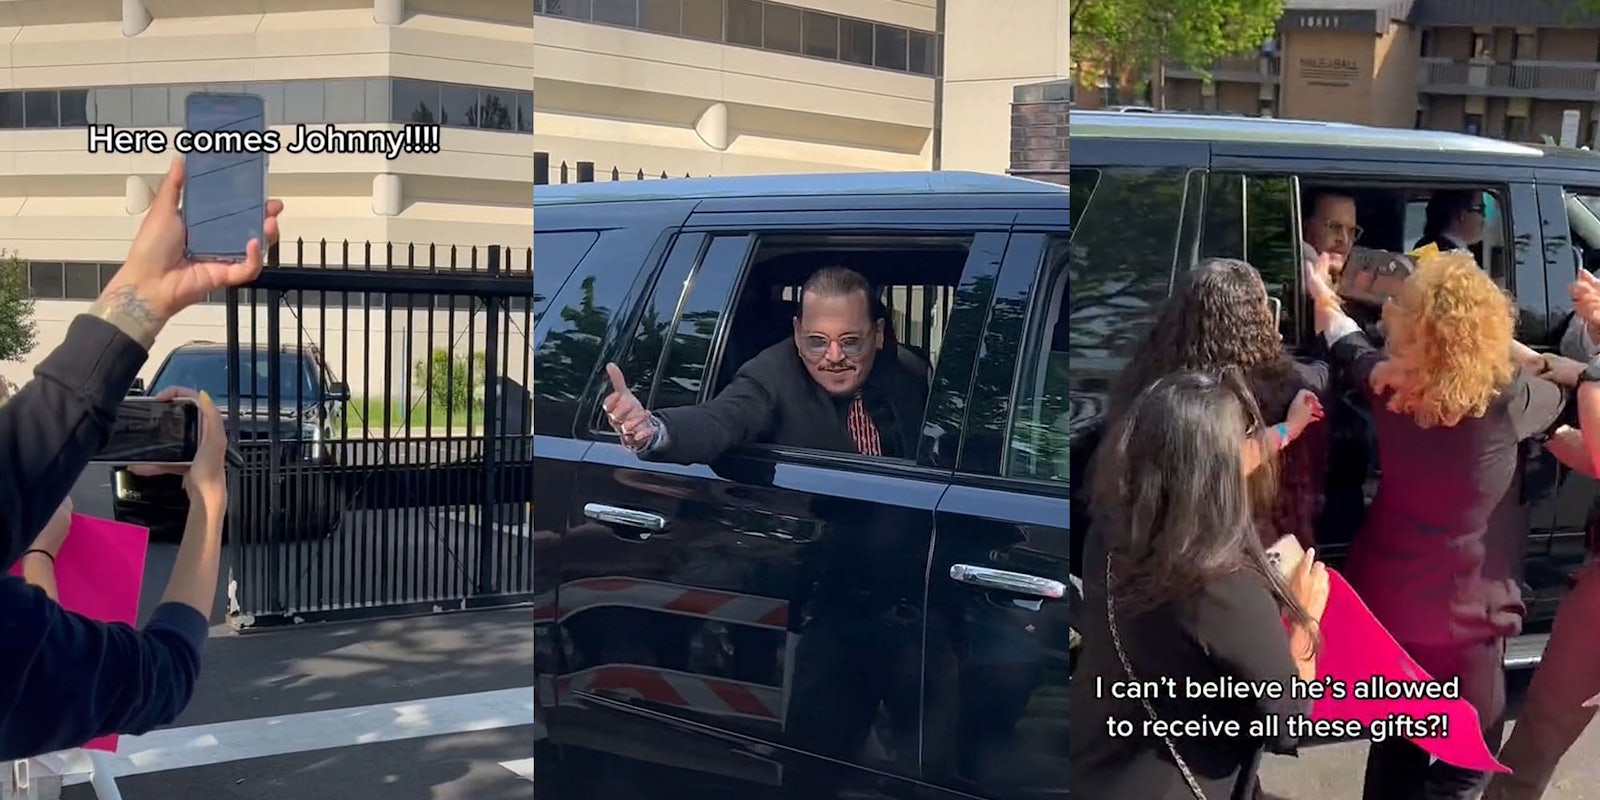 Women waiting at gate for Johnny Depp as he is pulling up in a black car caption 'Here comes Johnny!!!!' (l) Johnny holding hand out of car window smiling (c) fans up at the window of car shoving gifts into the window caption 'I can't believe he's allowed to receive all these gifts?!' (r)